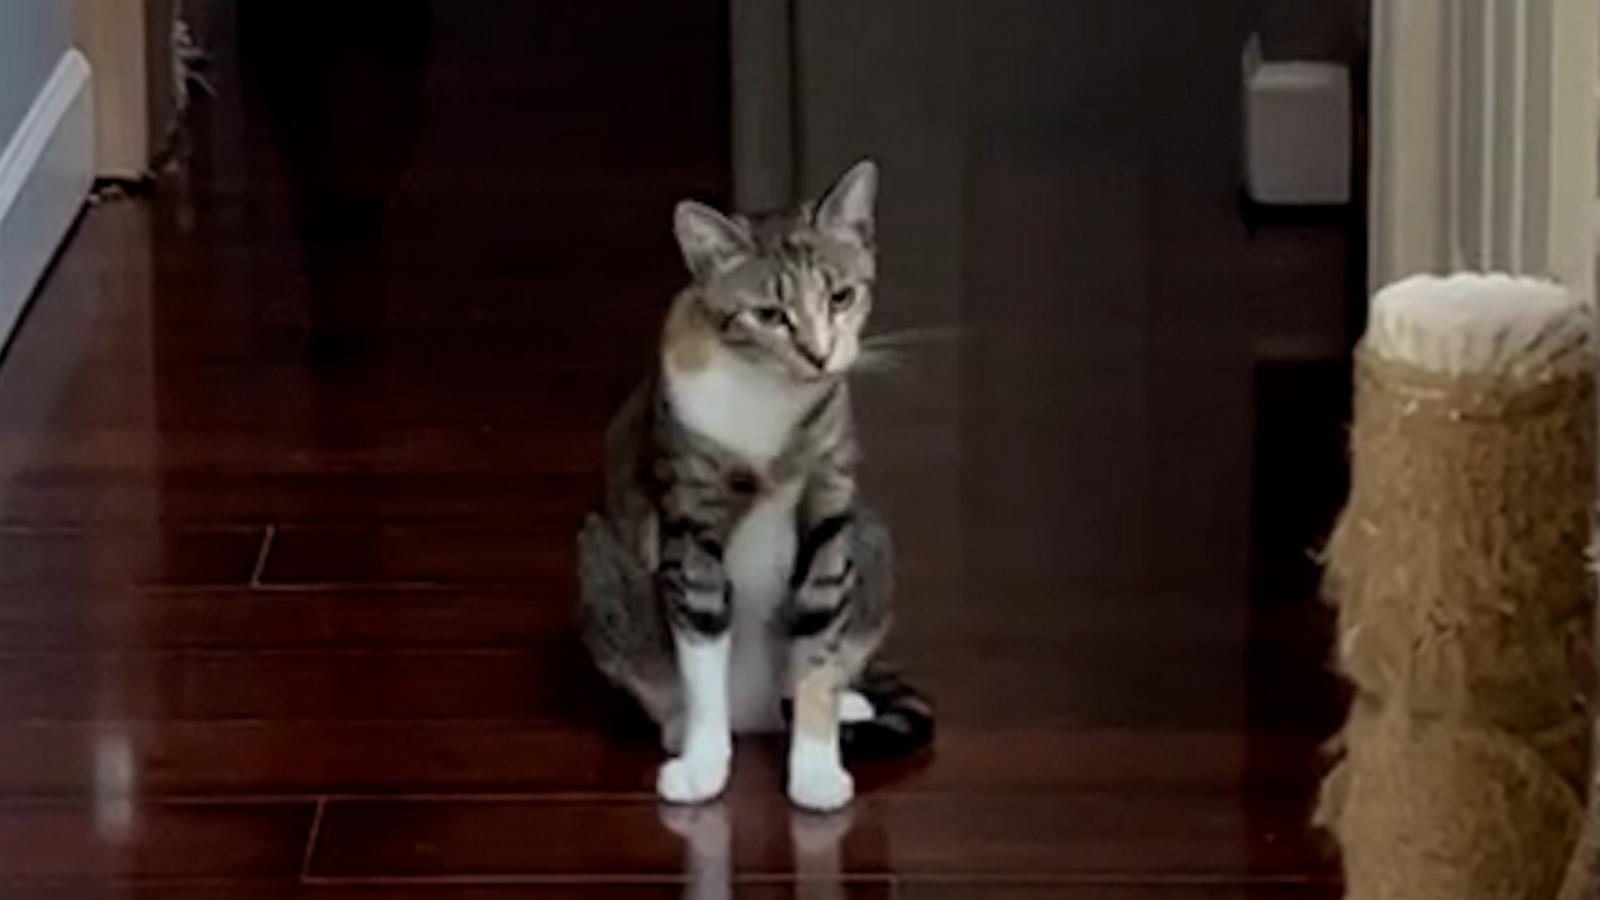 VIDEO: This vocal cat sounds like she's showing off her singing skills